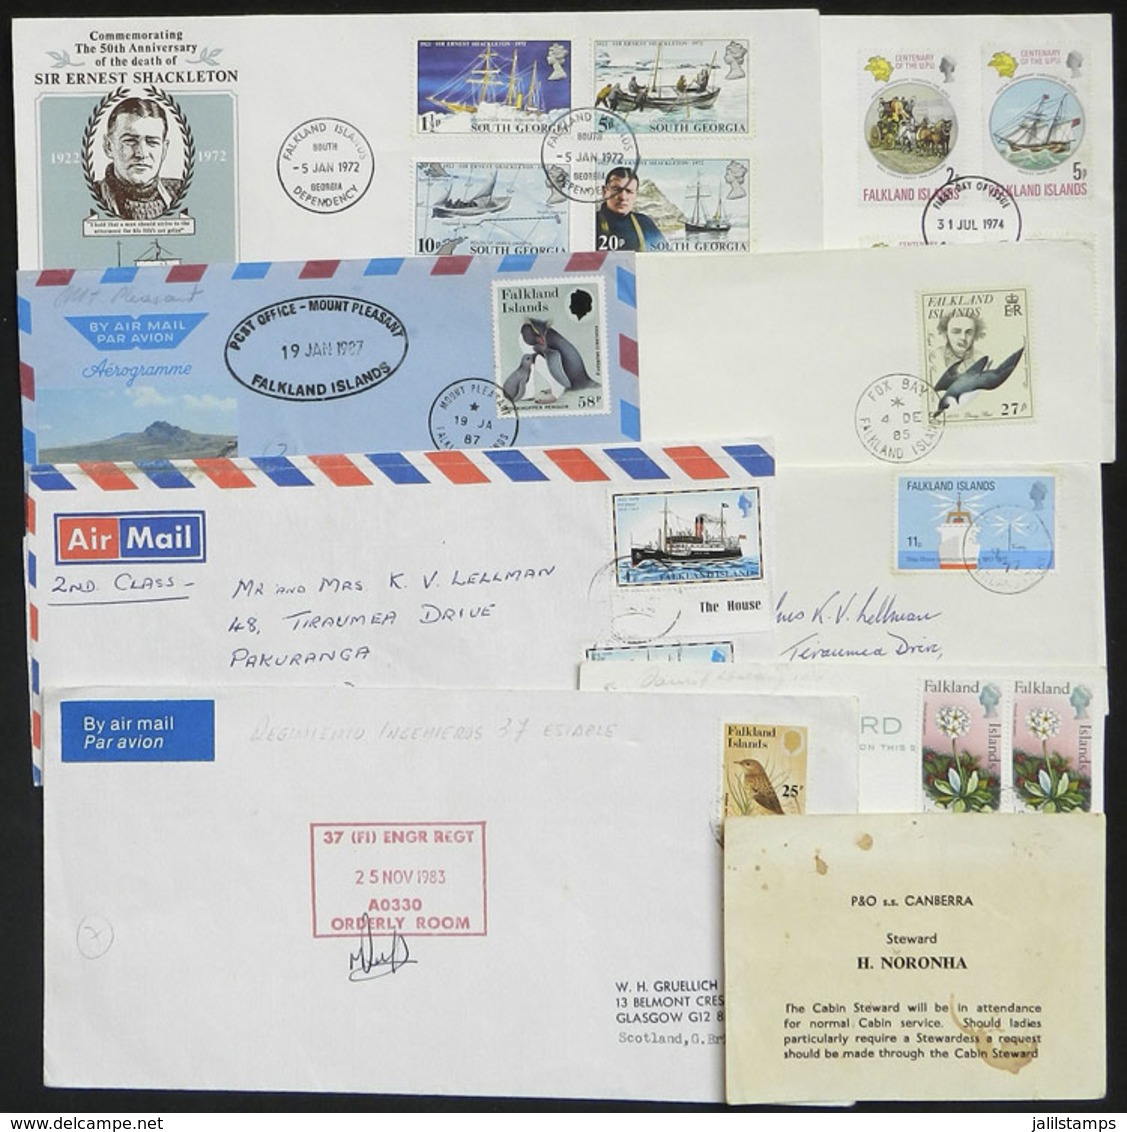 FALKLAND ISLANDS/MALVINAS: 8 Covers Of The Years 1974 To 1985, Also A Card Of The Ship S.S.Canberra, Good Lot! - Falkland